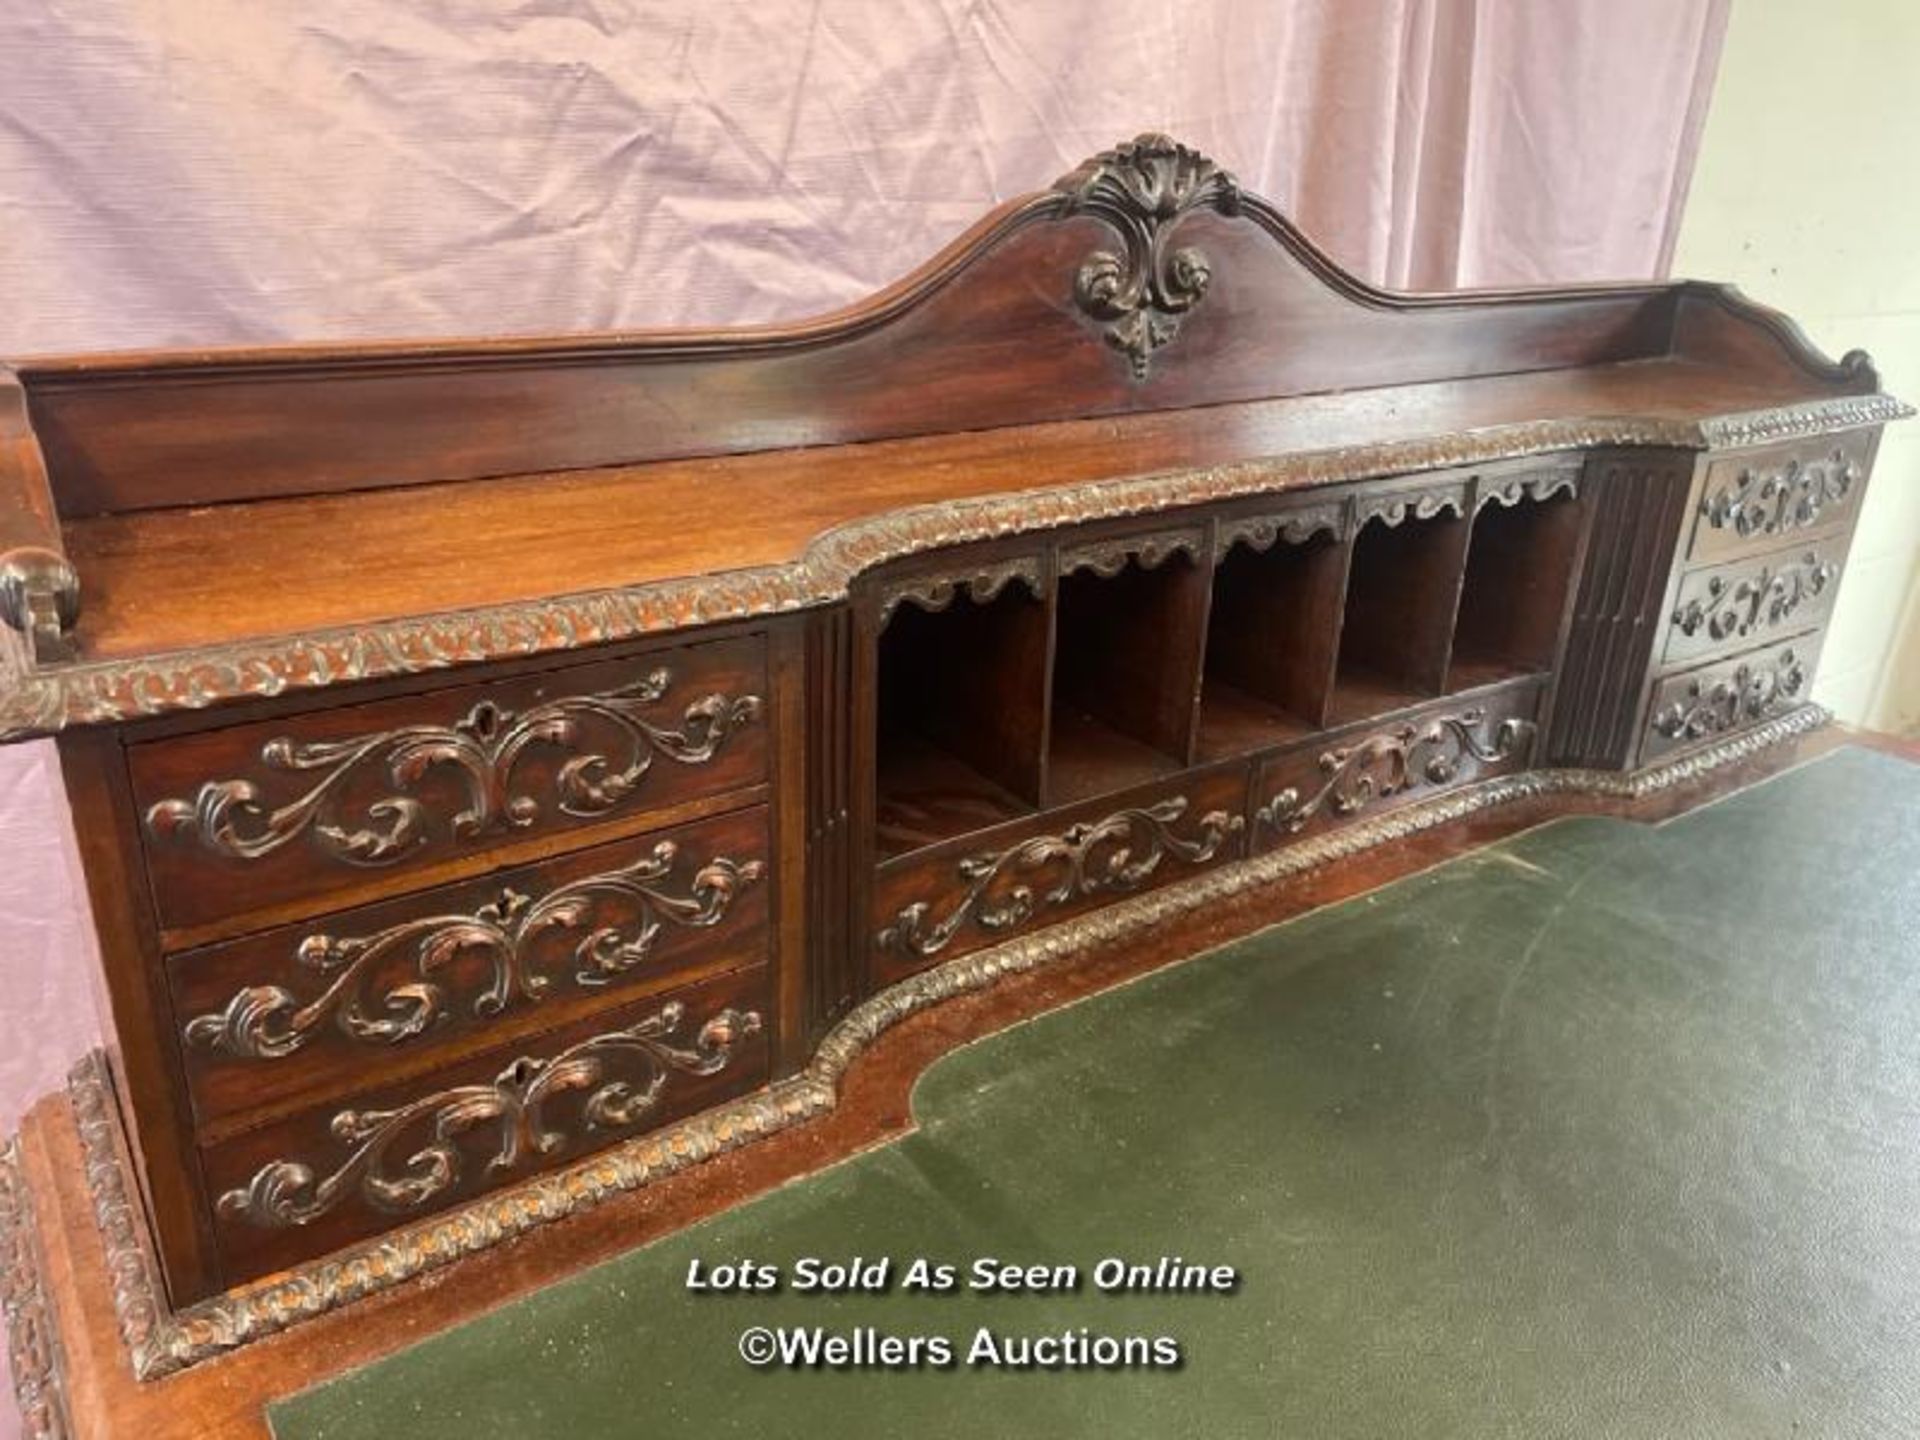 CIRCA 1900, GEOGIAN STYLE HIGHLY DECORATIVE AND CARVED MAHOGANY LINED WRITING DESK WITH LEATHER - Image 3 of 11